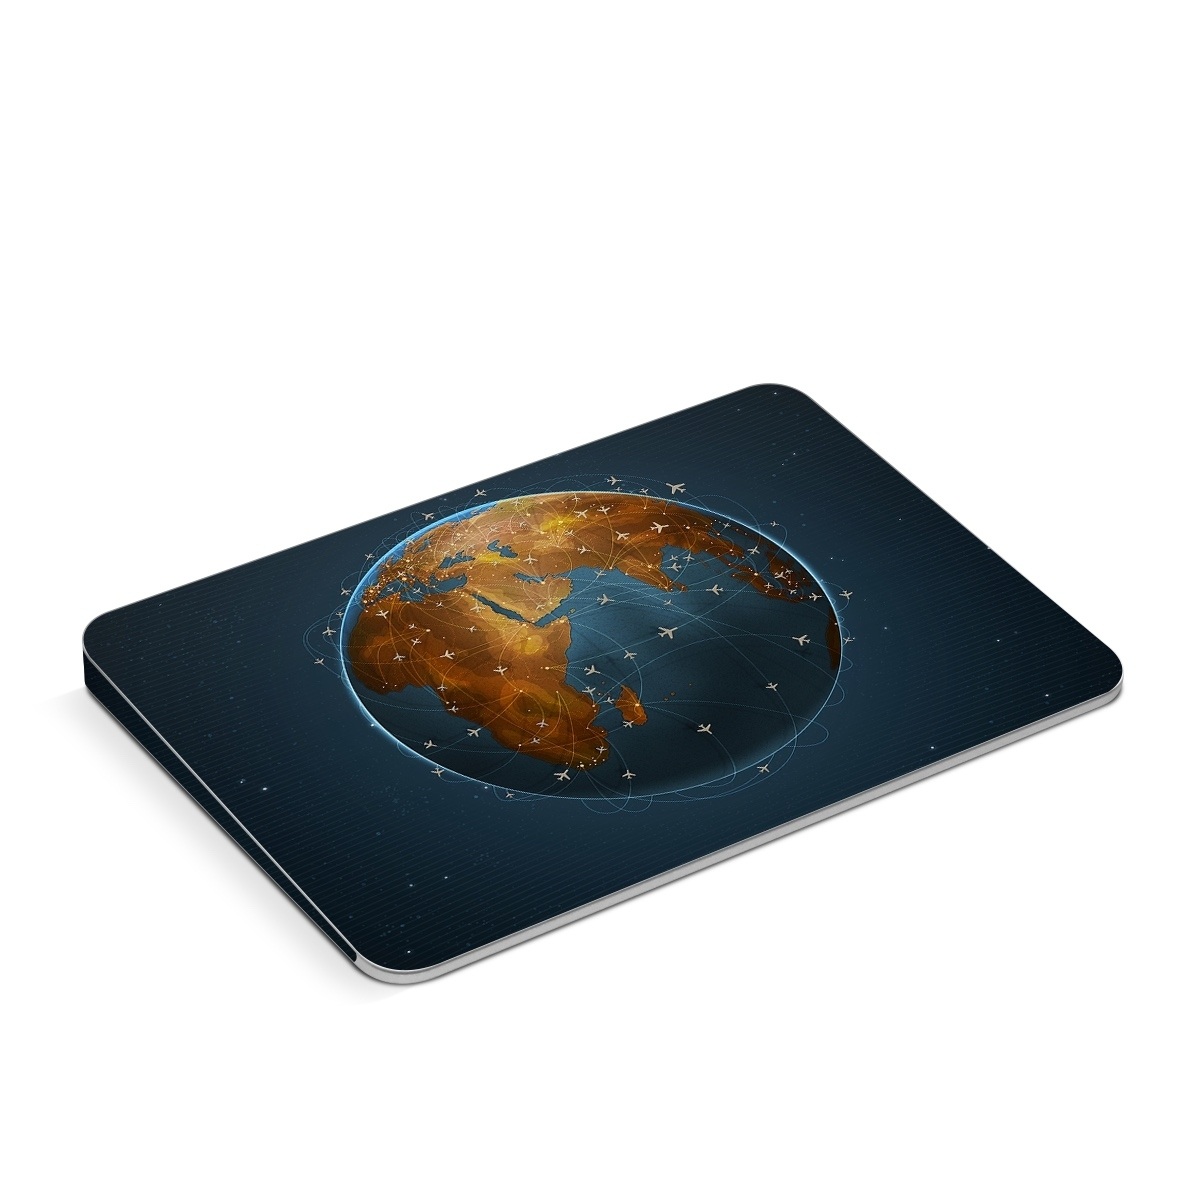 Magic Trackpad Skin - Airlines (Image 1)